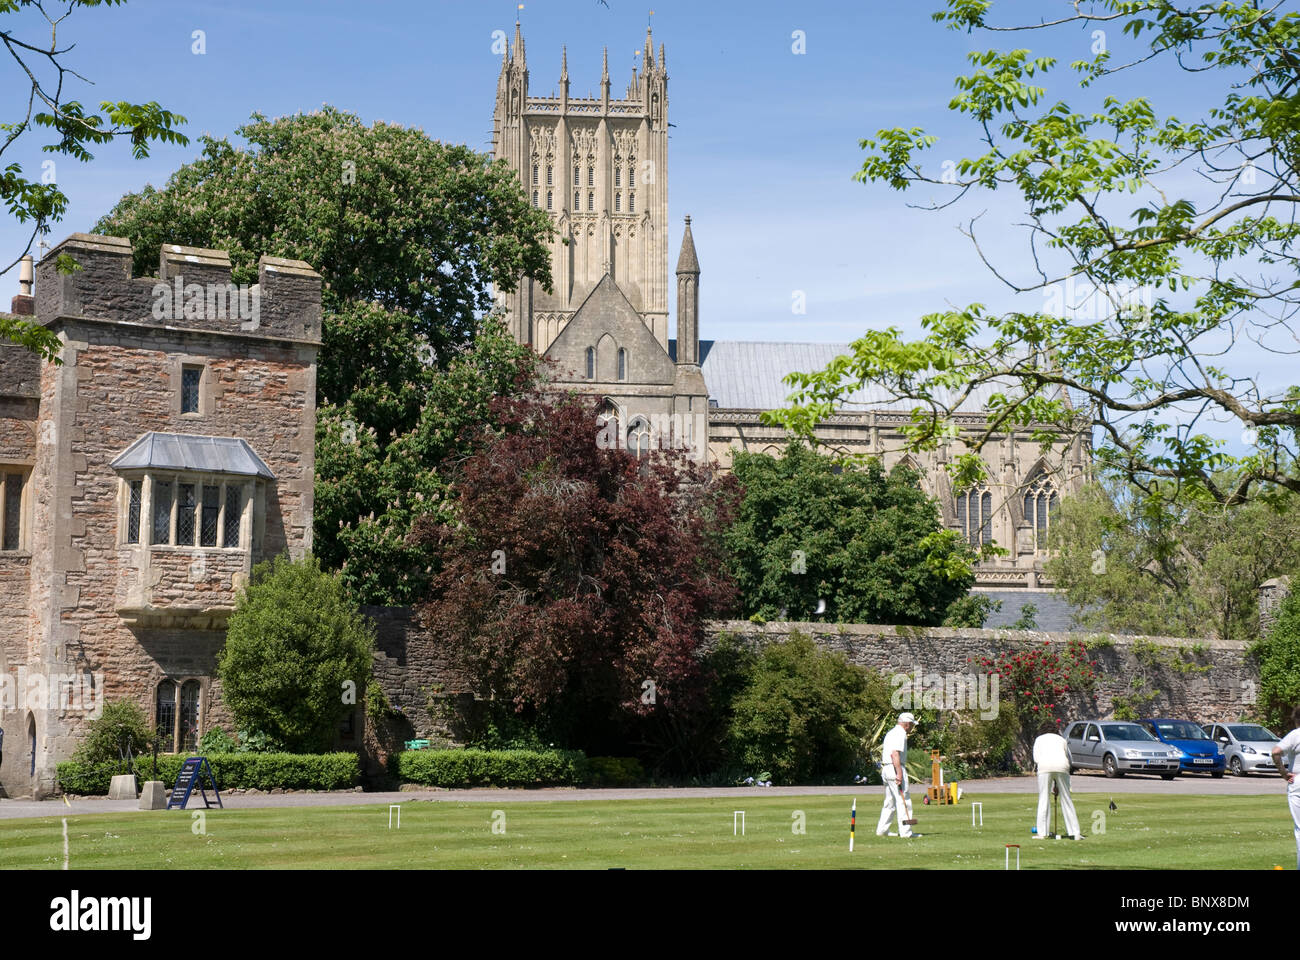 Croquet players on the lawn Bishops Palace grounds Wells Somerset, UK Stock Photo